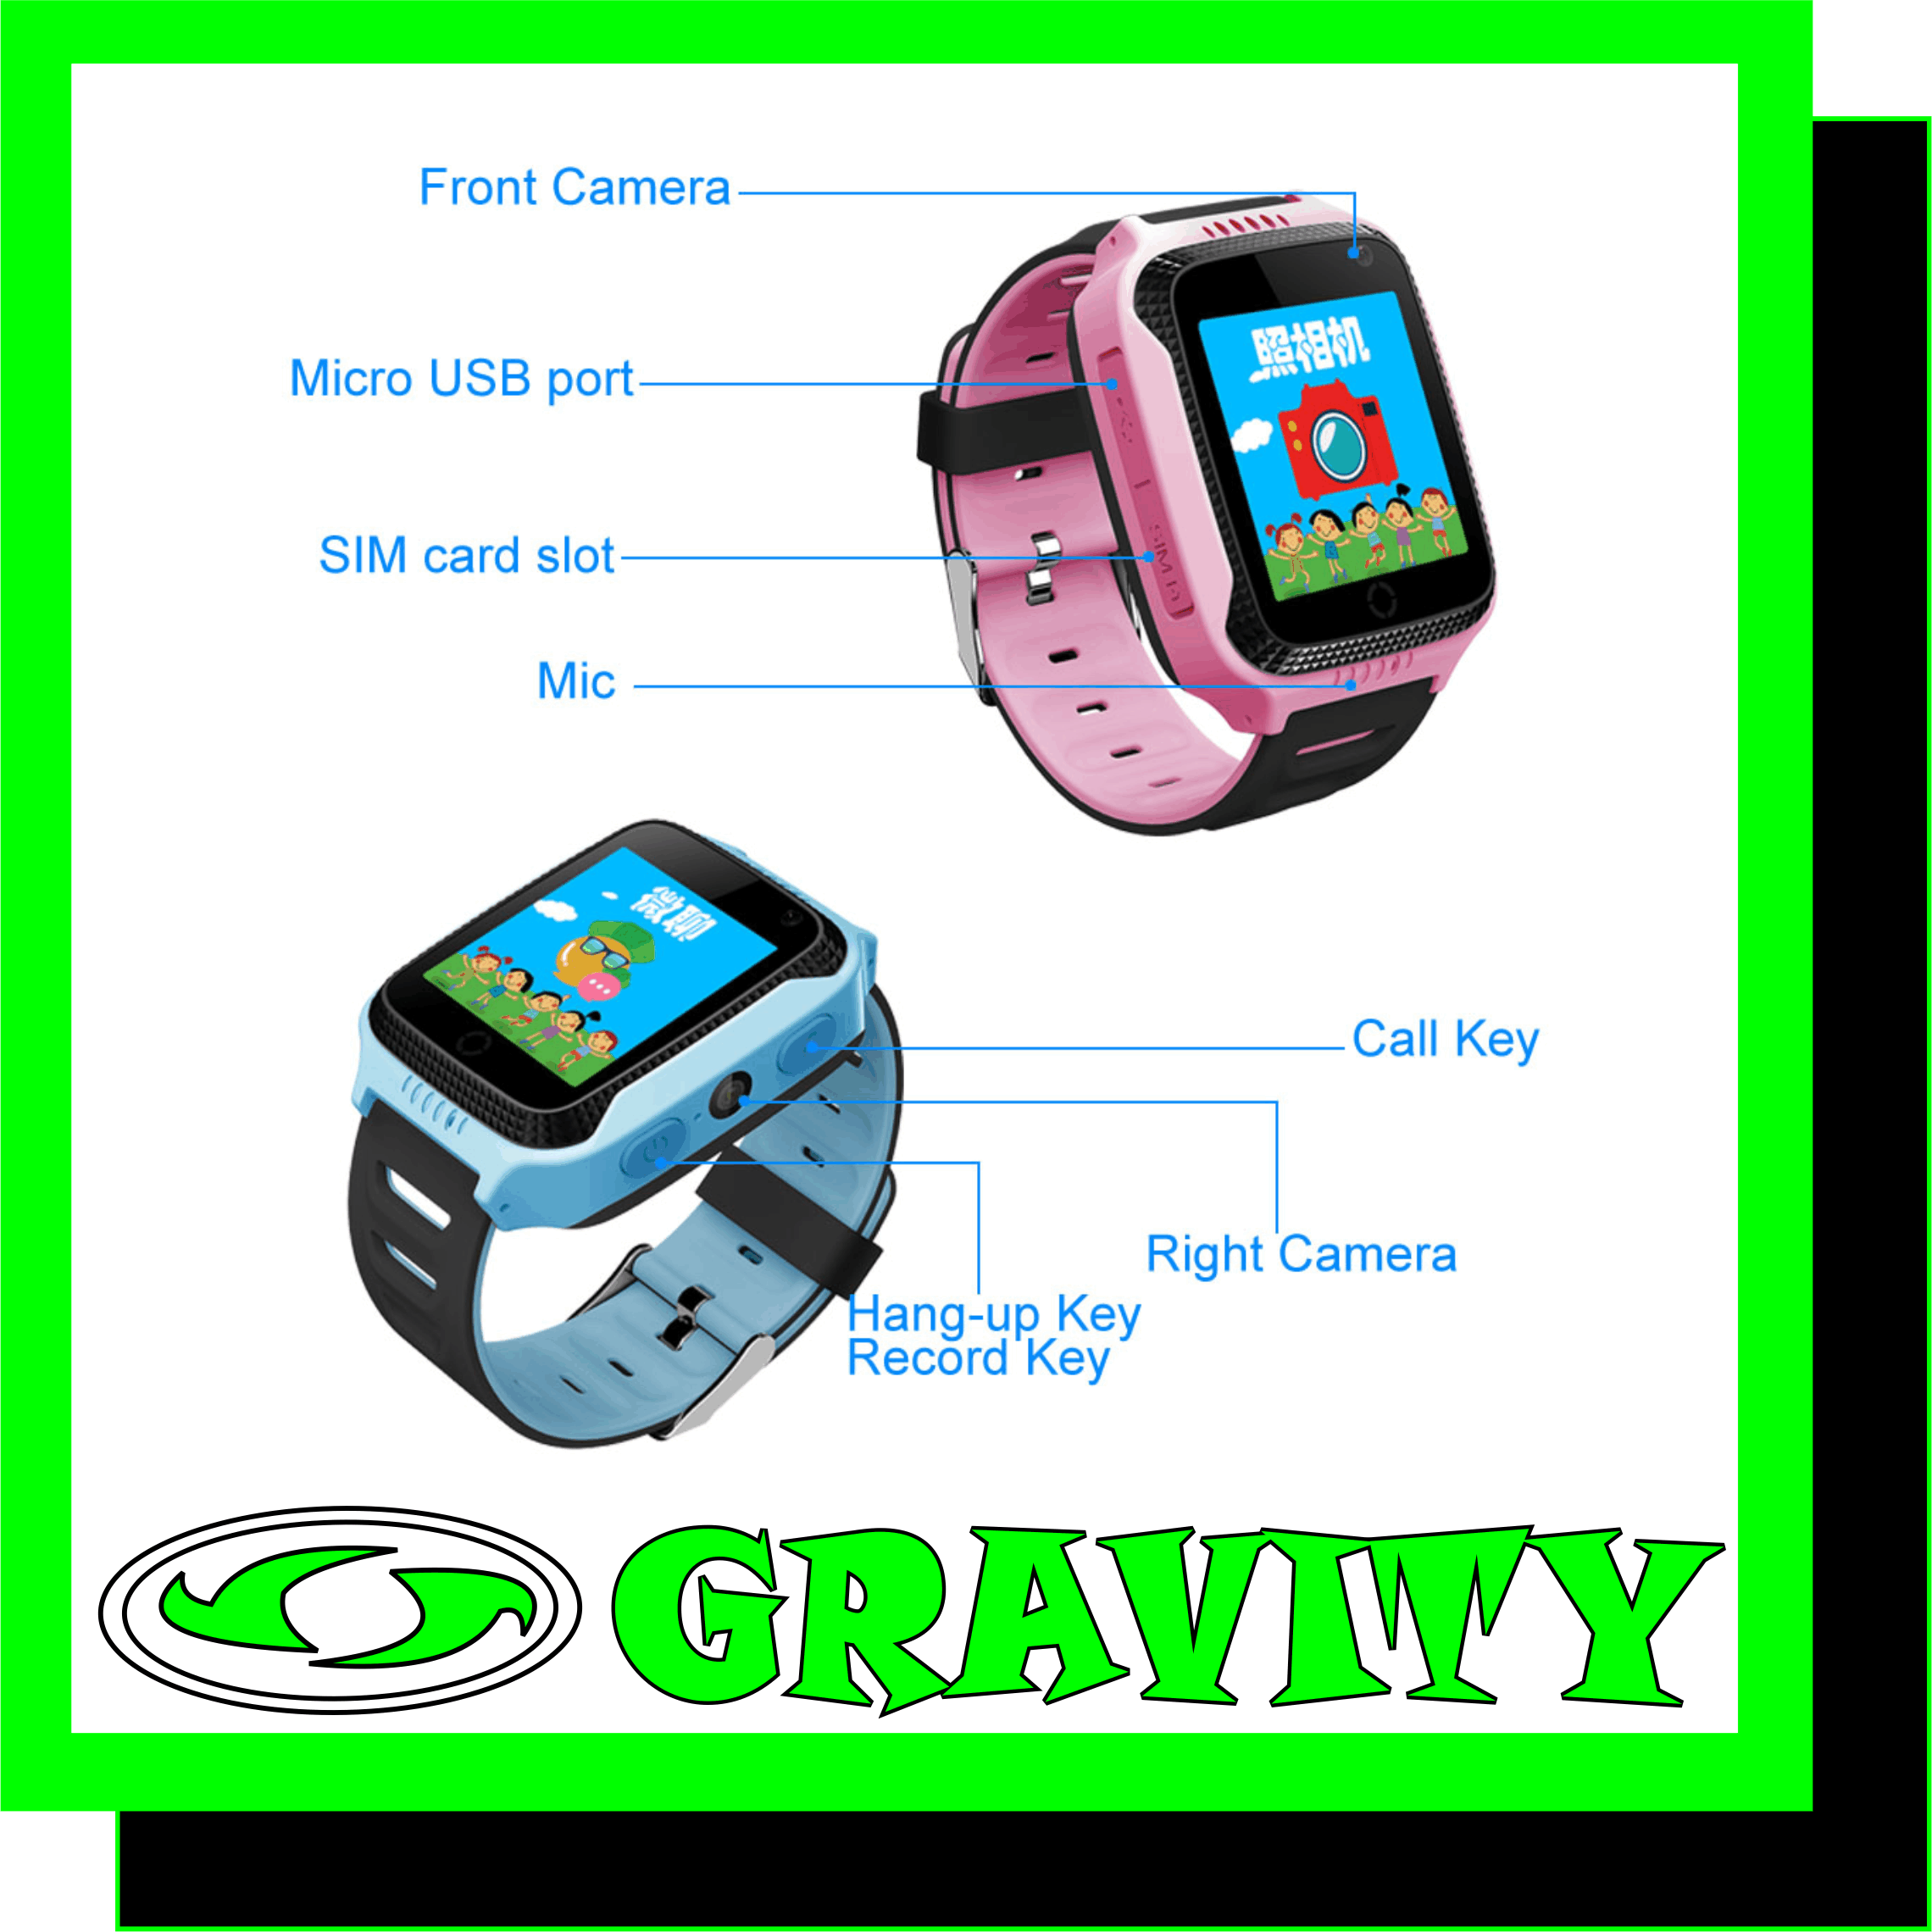 GPS SMART WATCH FOR CHILD BABY SUPPORT SIM CARD SOS CALL CAMERA FLASHLIGHT WRIST WATCH FOR BOY AND GIRL  Call & Chat Communication: Insert a 2G Micro SIM card to communicate with your child by sending calls or voice messages.  Please buy extra GSM network SIM Card  Safety Protection: Kids can press the SOS key for 3 seconds to circularly call families' numbers for help. This function is really helpful for emergency situations.  LBS+AGPS Location: Built-in double Mode Global Positioning System, so you can keep track your kids'location at anytime. When Kids are indoor or at poor gps signal place, the watch will work on LBS mode, and provide an approximately position, the error will be caused by local signal place, error will be 0.3 ~ 4 miles.  Fun Camera: Your kids can enjoy take selfies and picture. And the flashlight can be used anytime if necessary.  Other Features: Calling, Phone Book, Quick Learning, Chat, Camera, Album, SOS Emergency Call, LBS+AGPS Positioning, Anti Lost, Remote Control, Remote Camera, Flashlight. Parents can control and set the smart watch through the APP "Setracker".